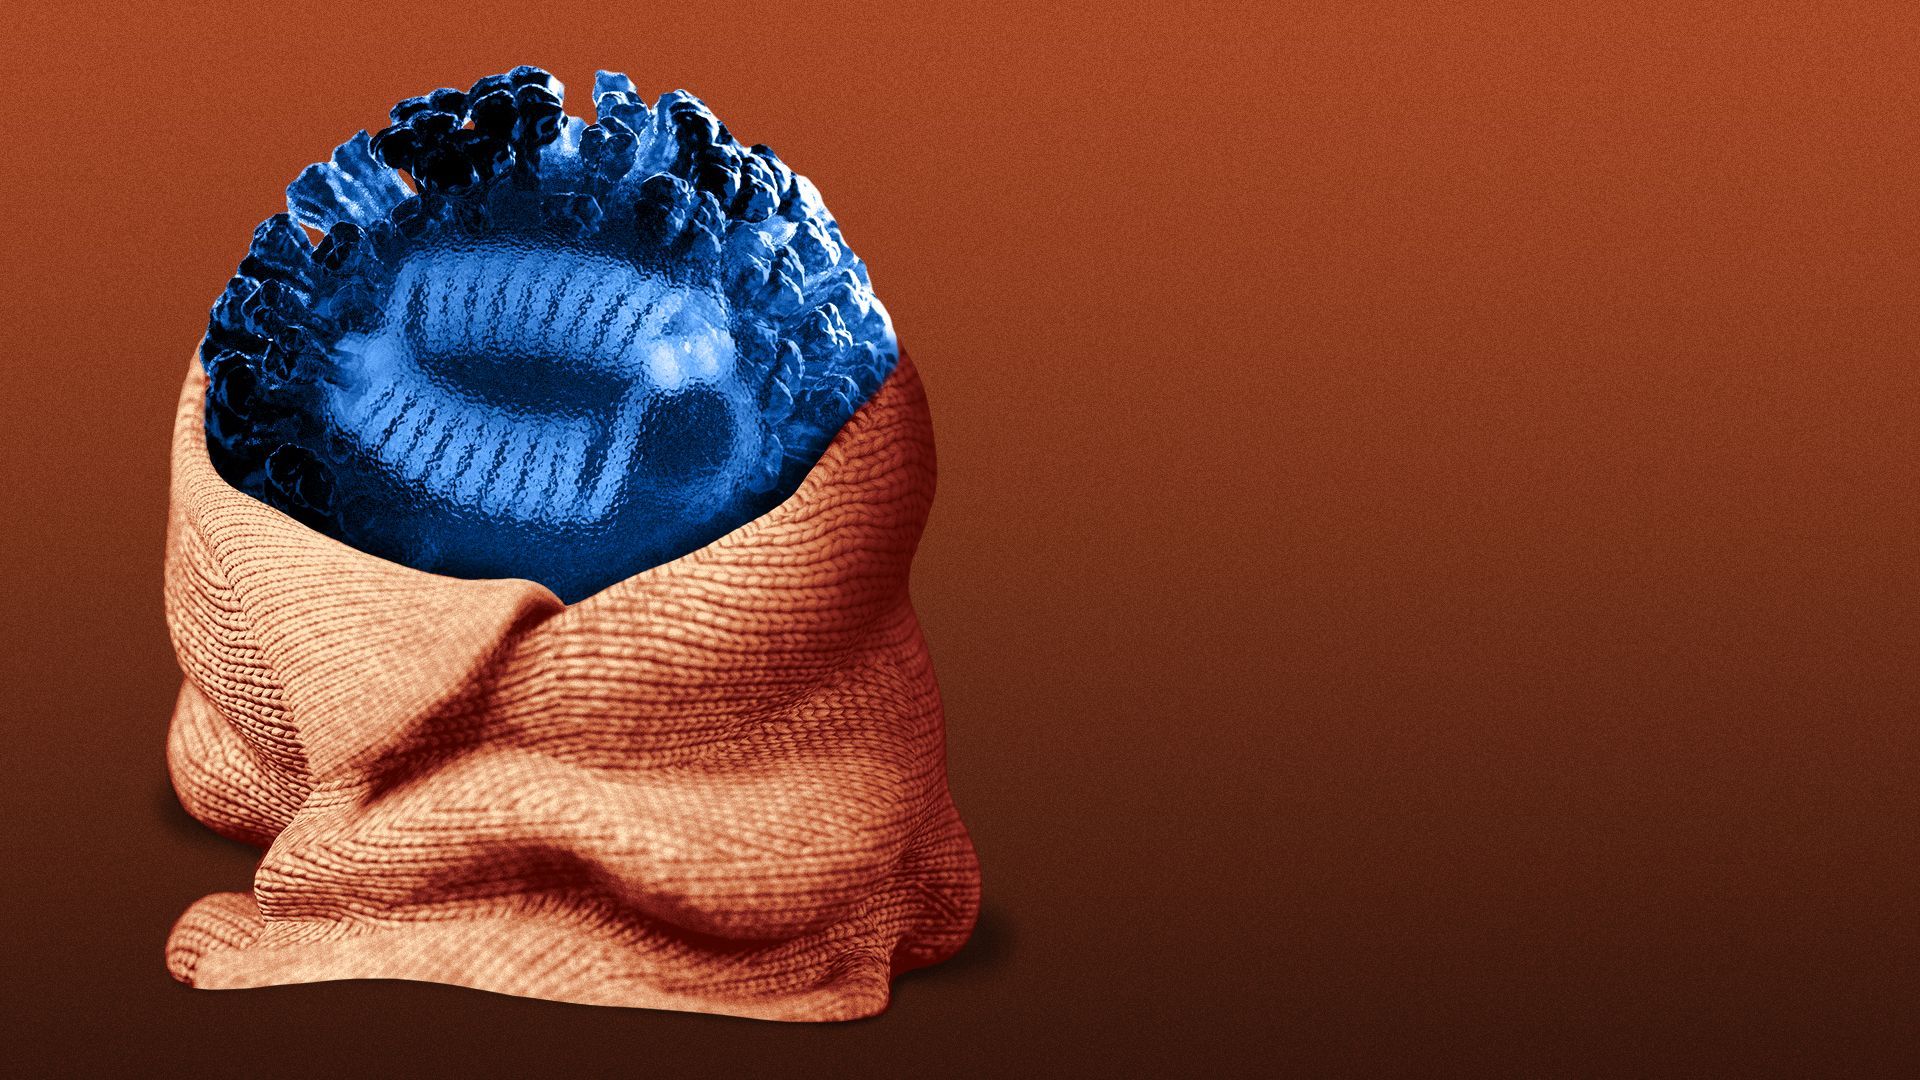 Illustration of an influenza particle wrapped in a blanket.